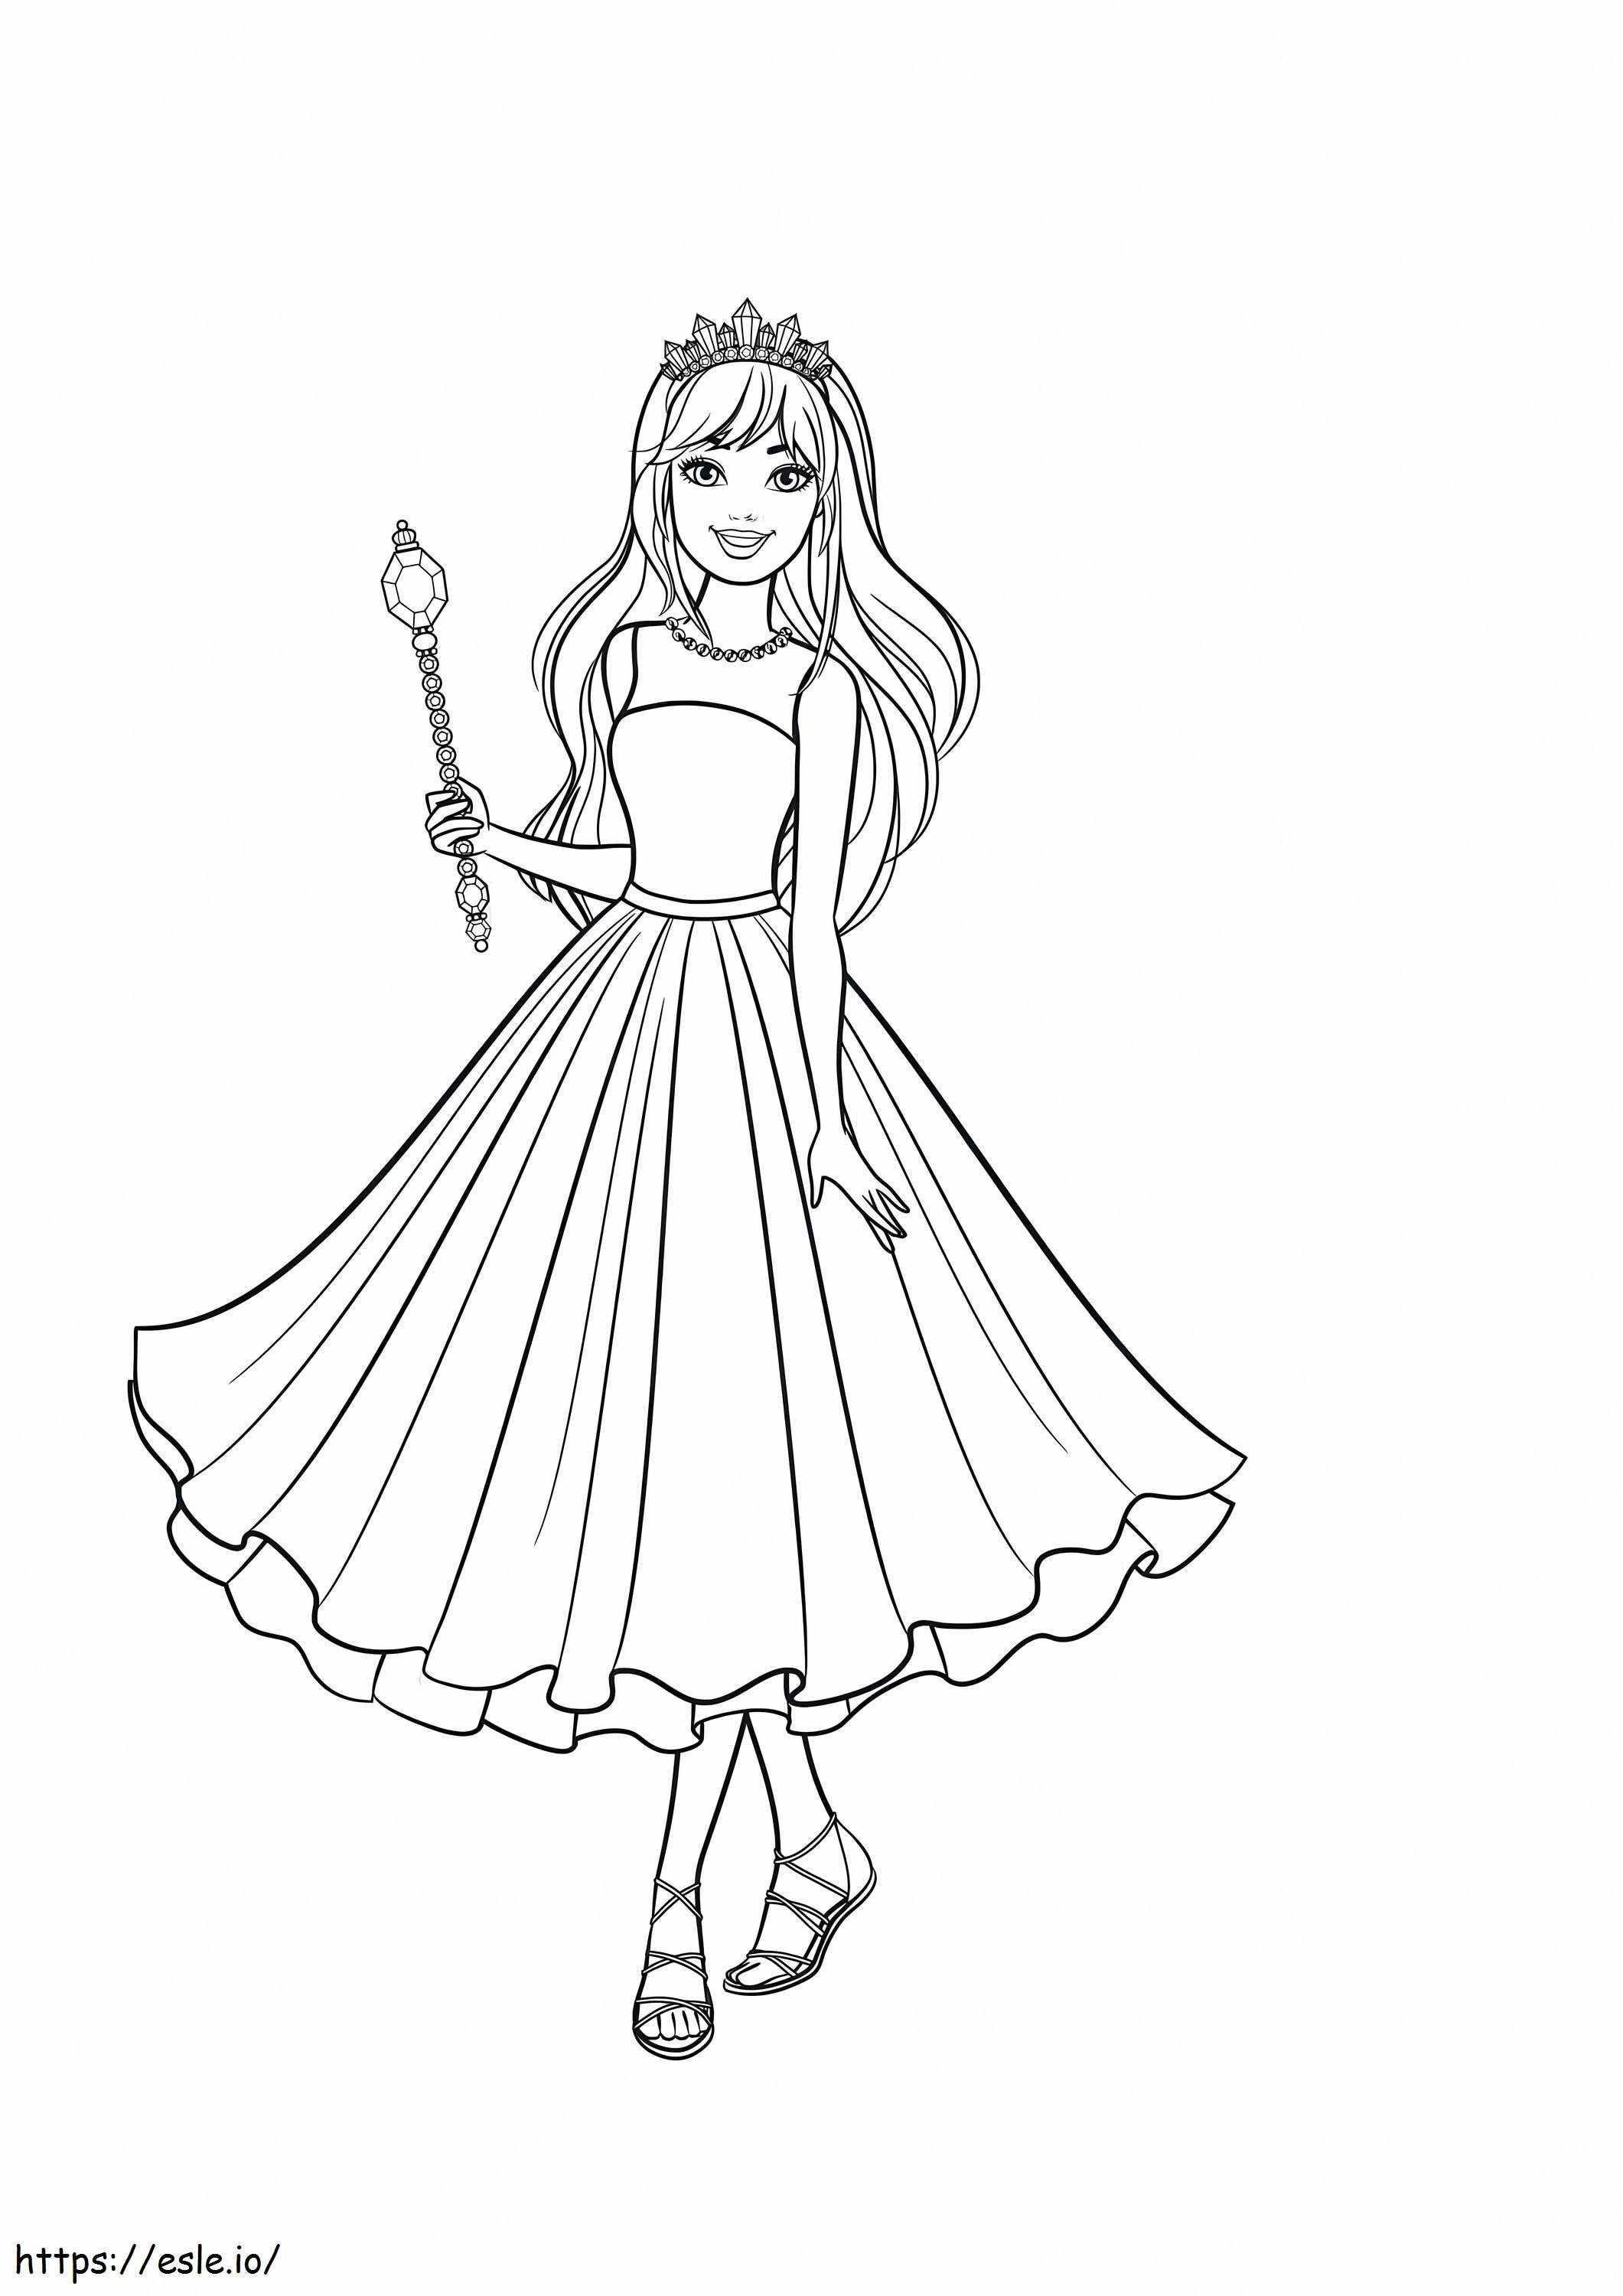 Barbie Princess Glitter coloring page